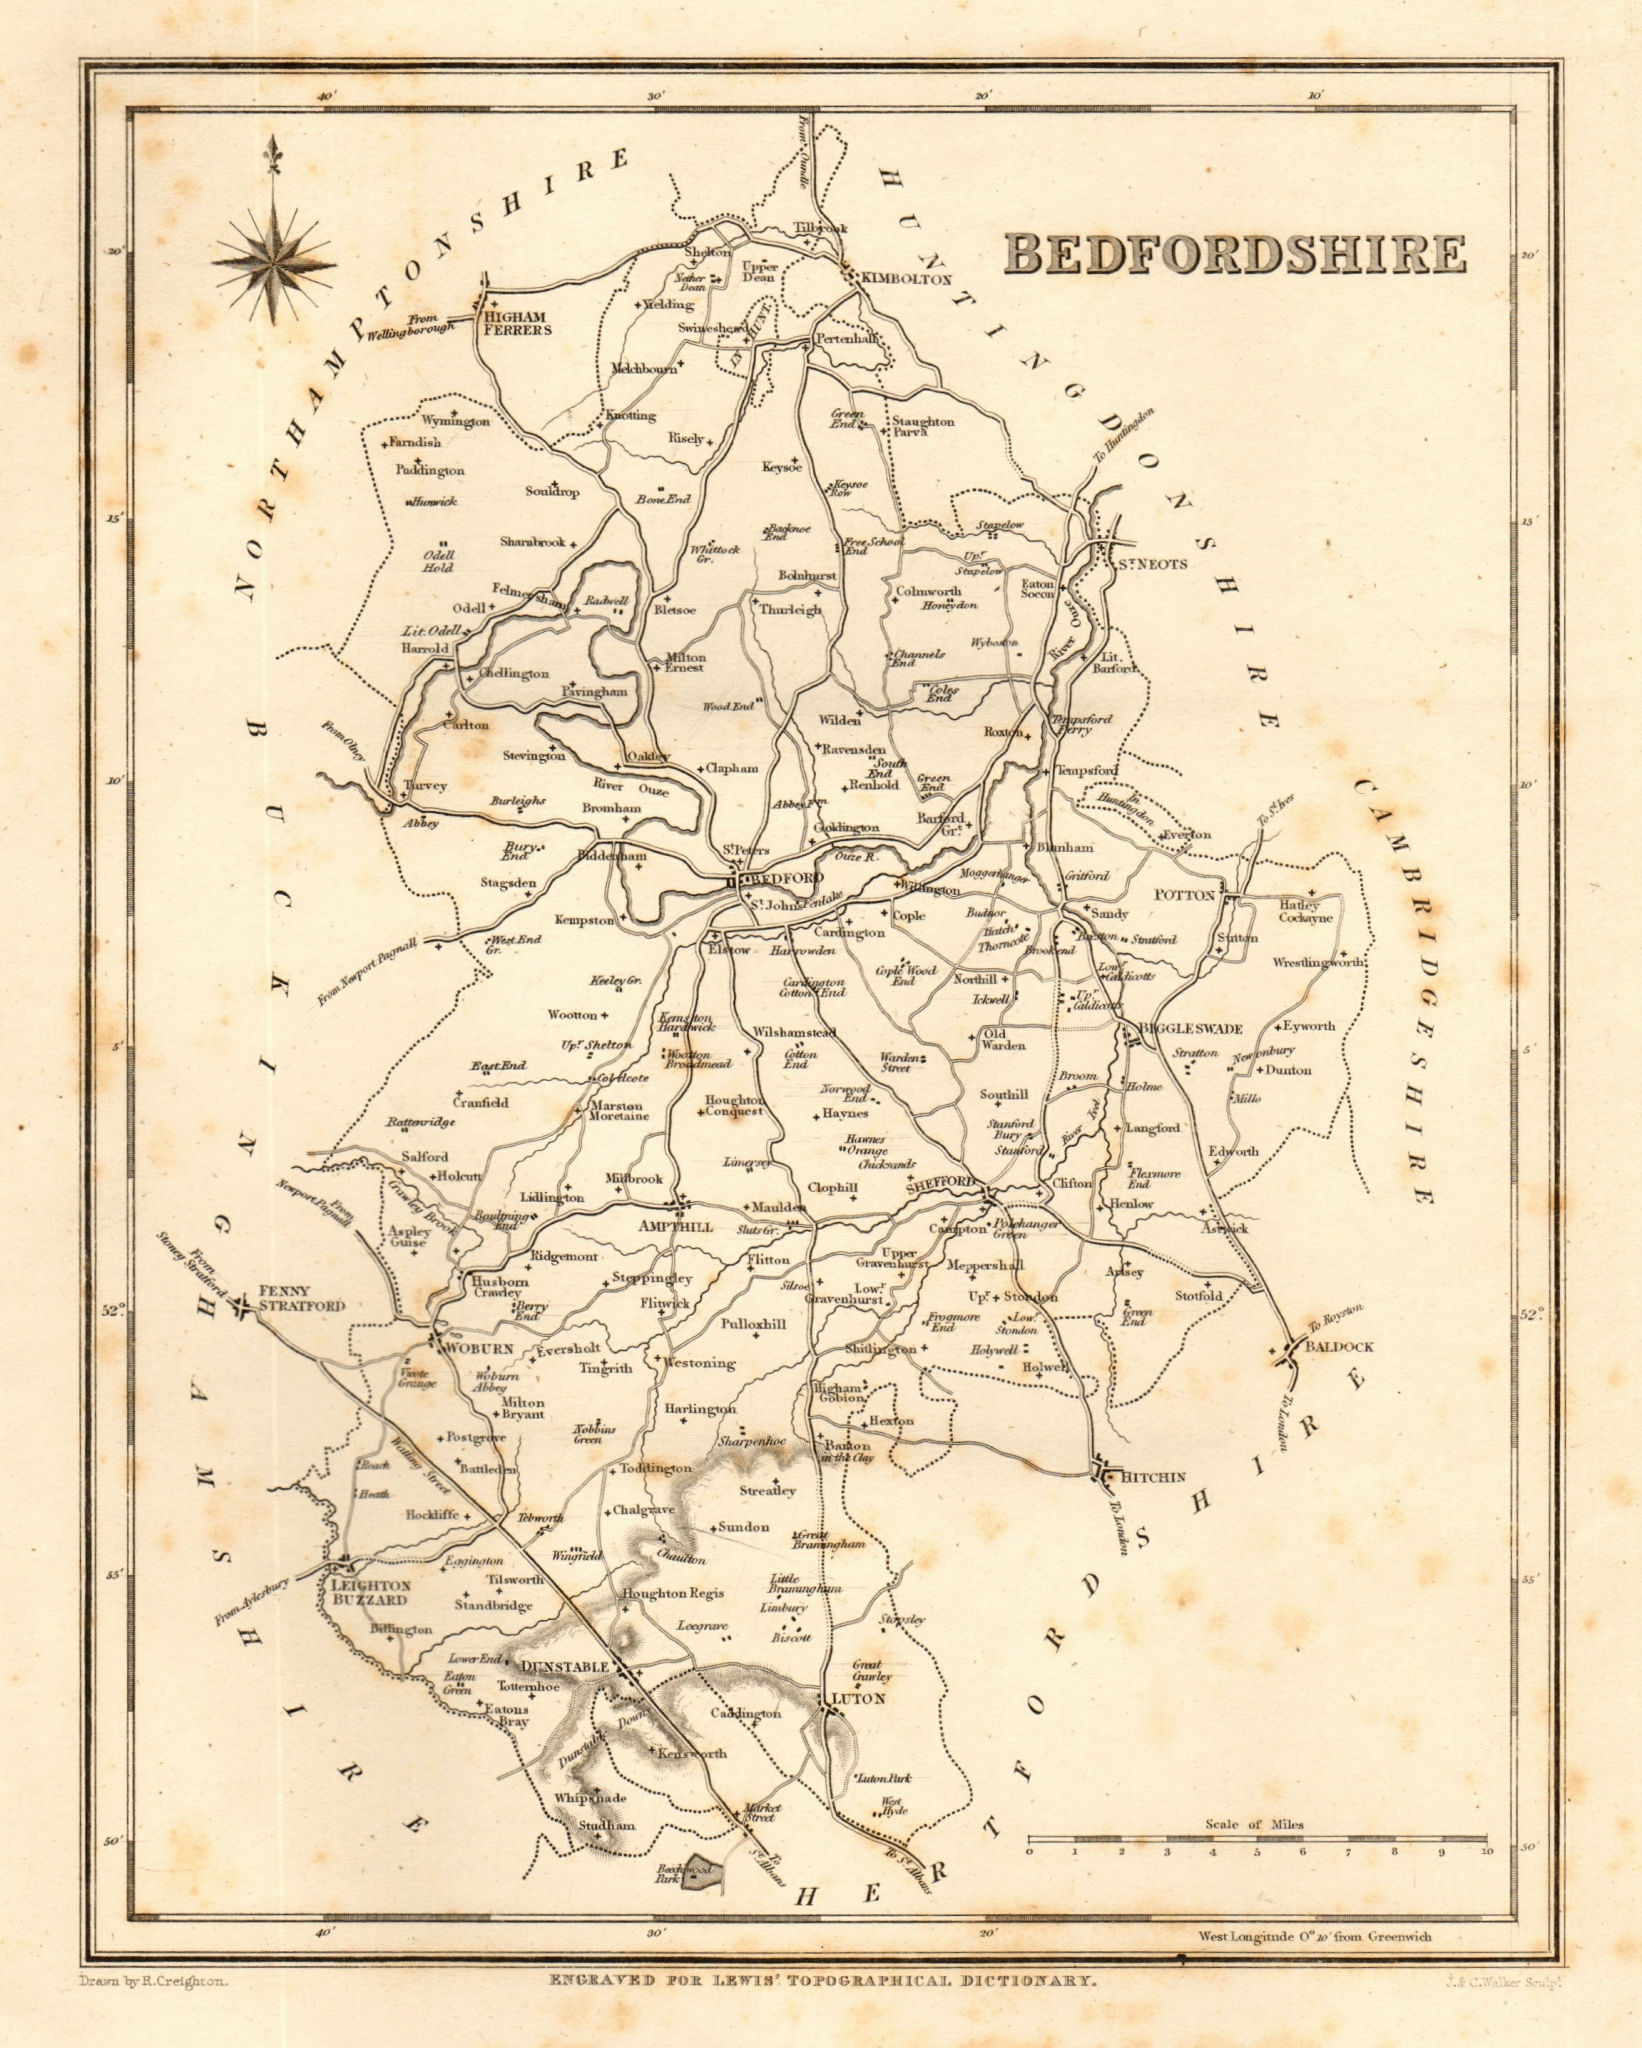 Associate Product Antique county map of BEDFORDSHIRE by Walker & Creighton for Lewis c1840